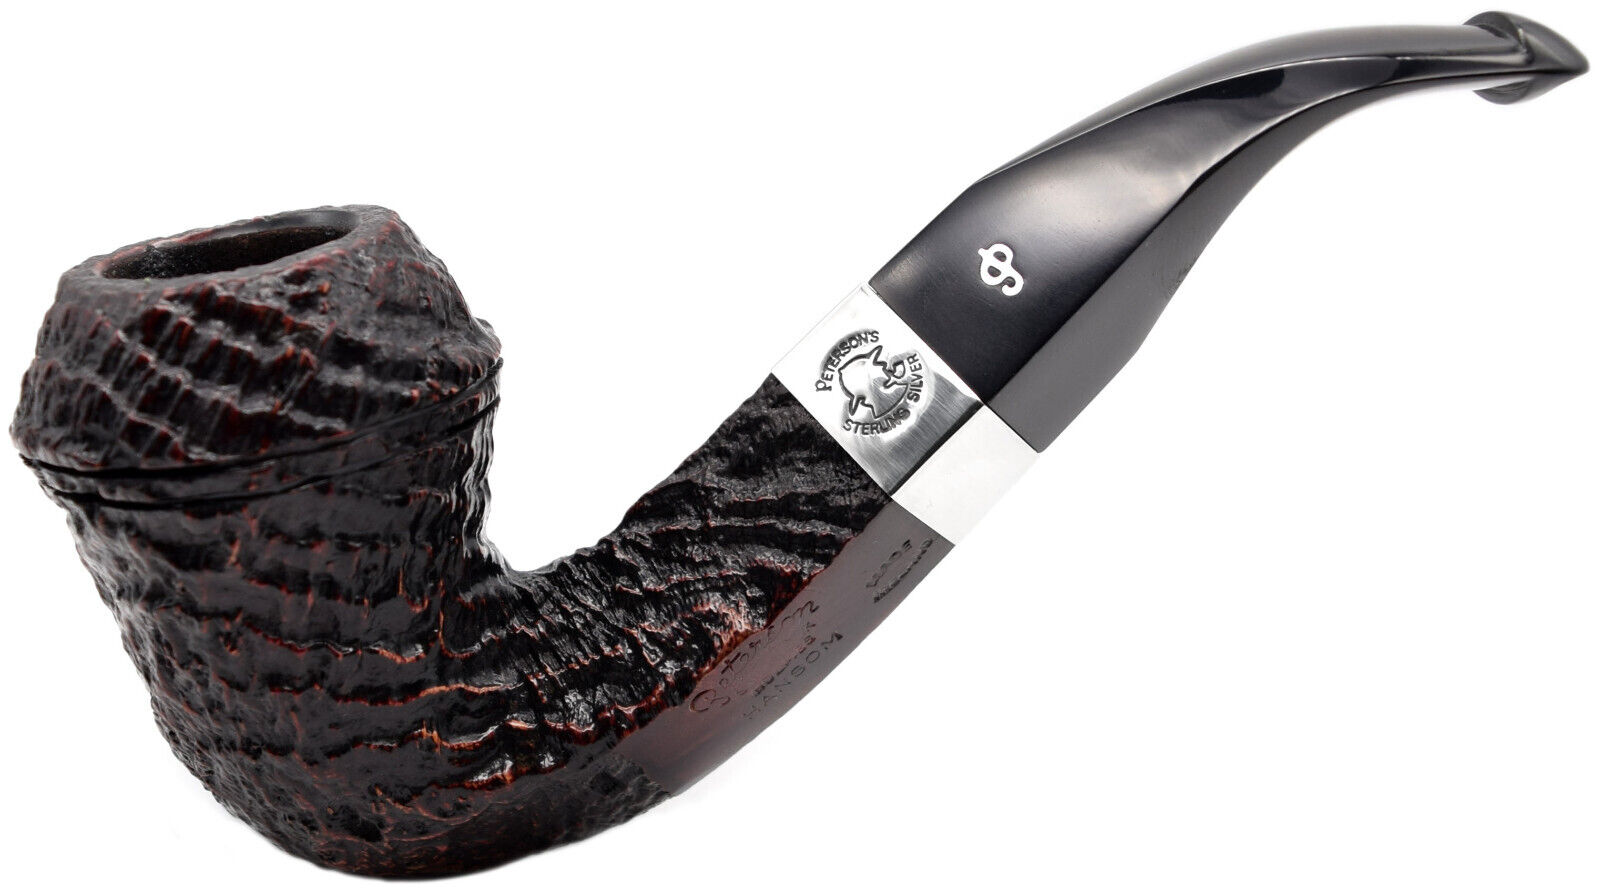 Peterson Sherlock Holmes 'Hansom' Red and Black Sandblast Silver Mounted Pipe